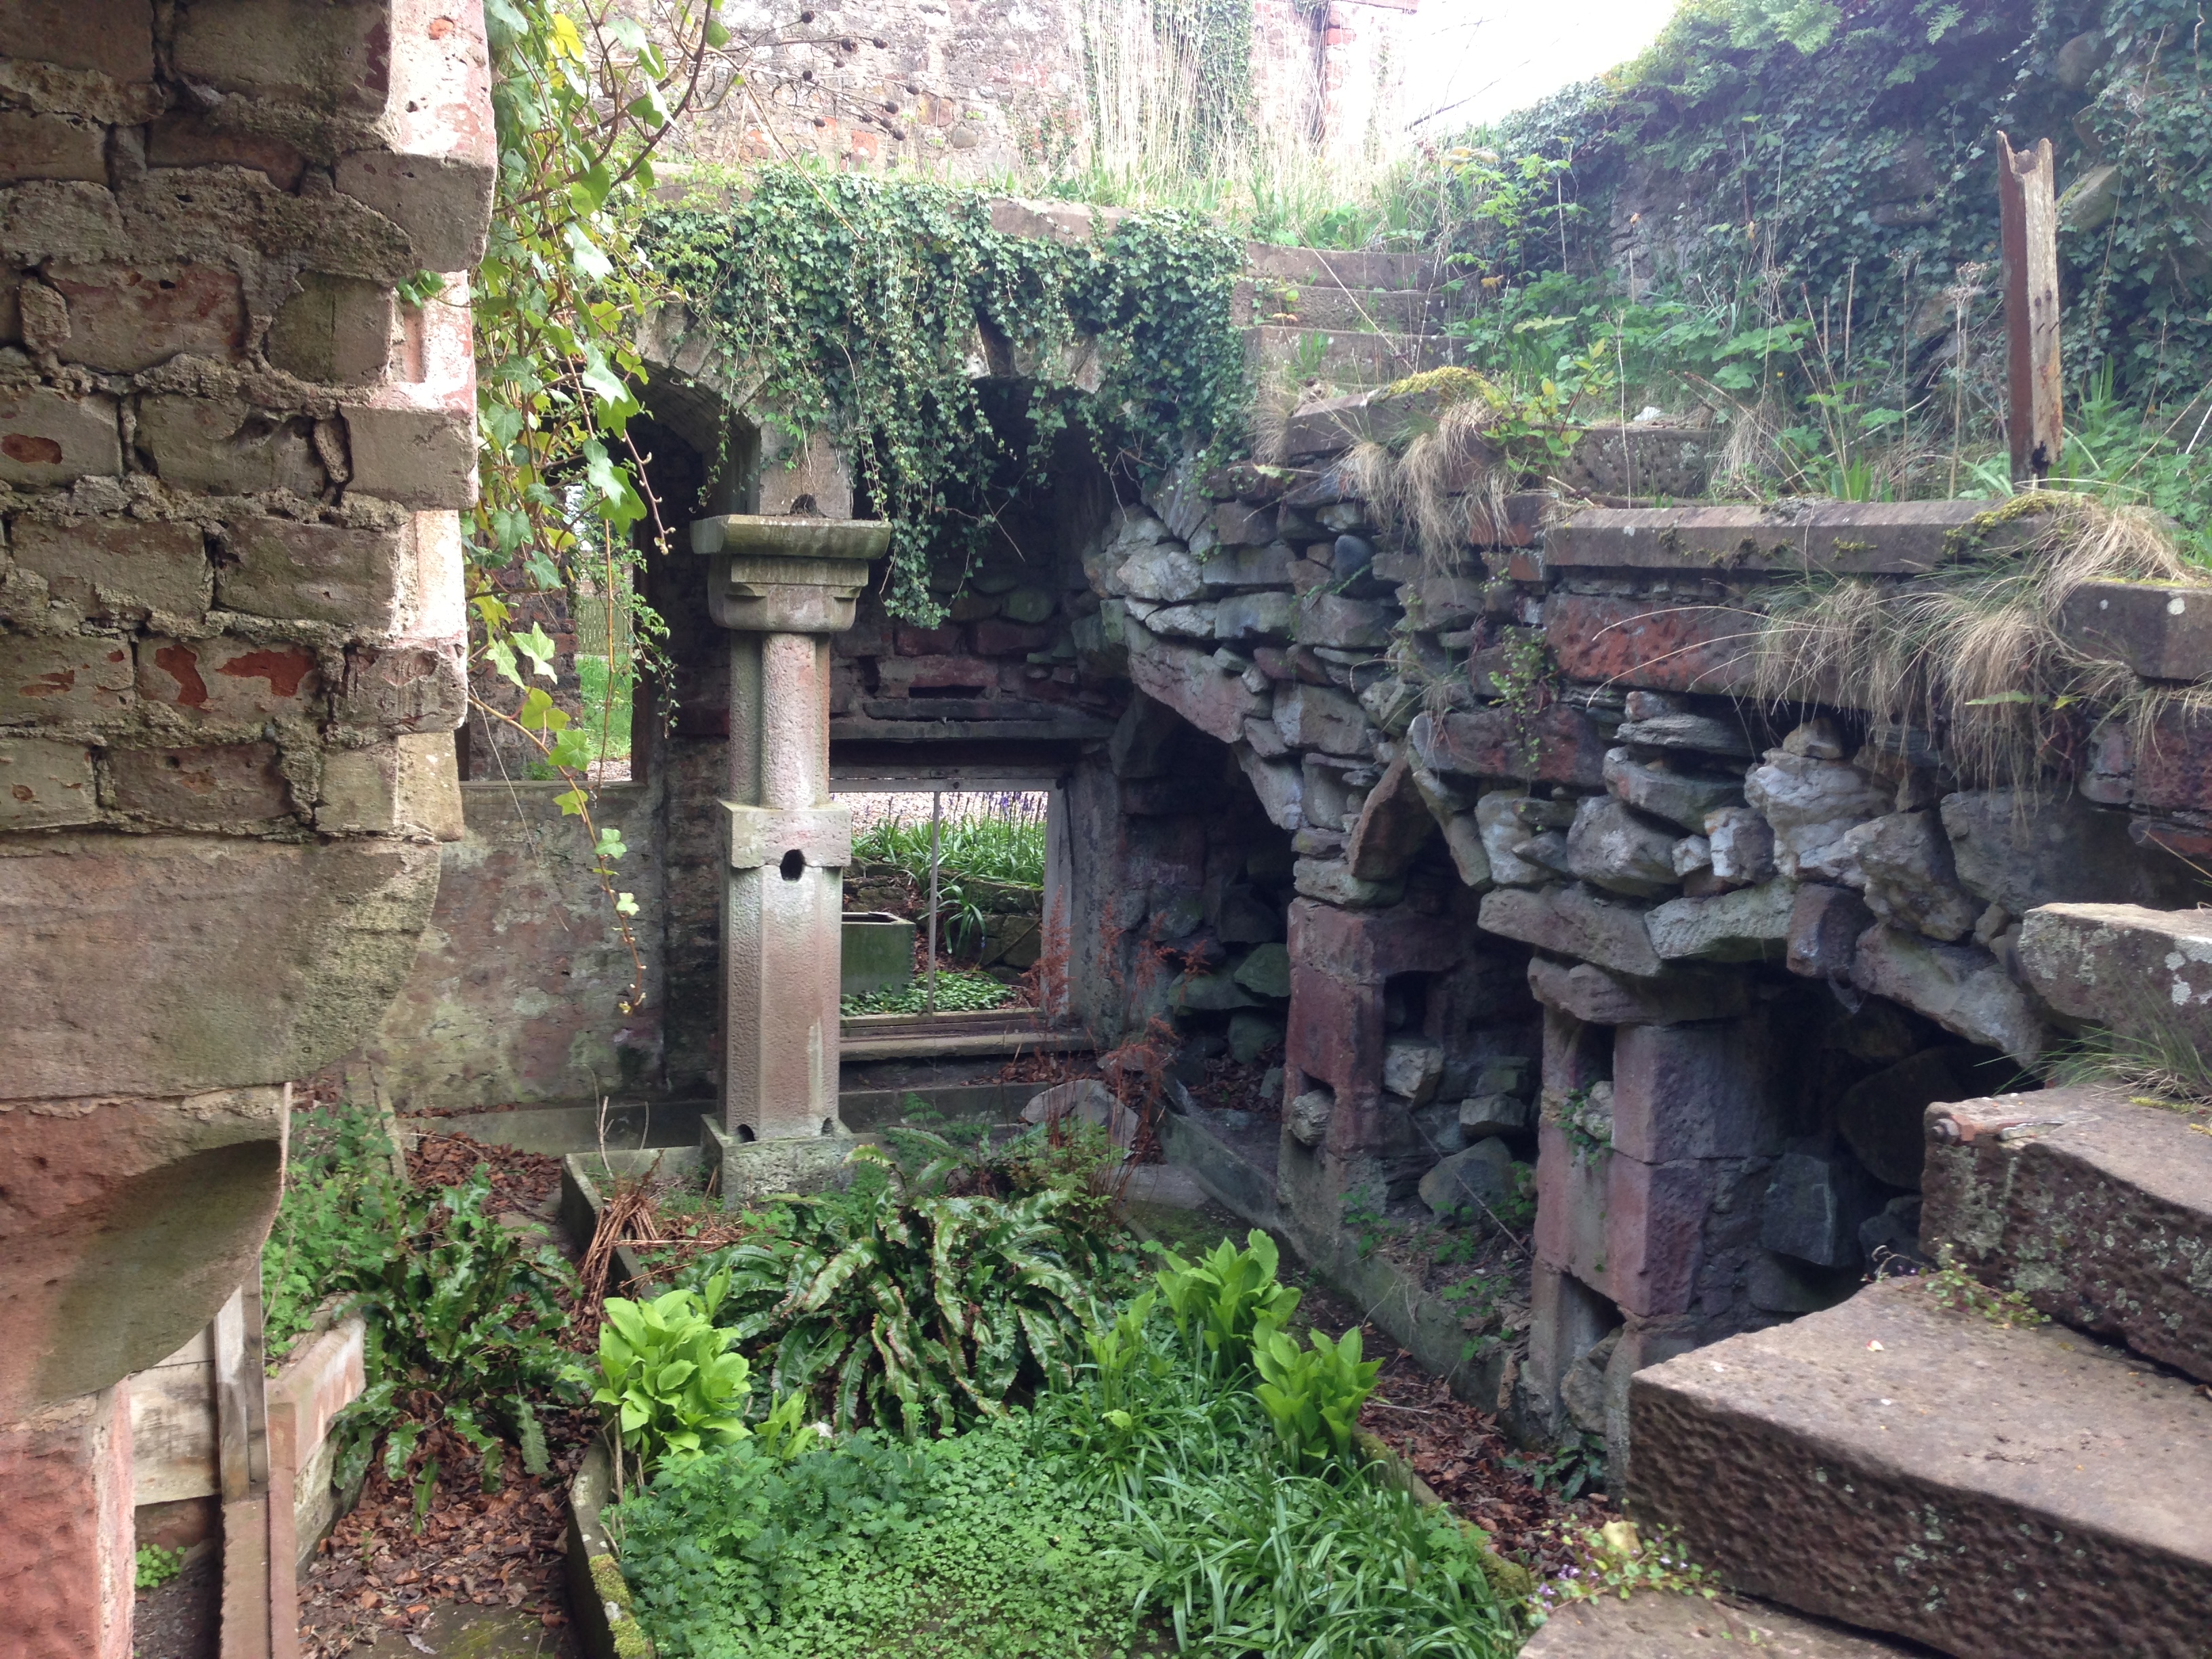 The current fernery in the grounds of Hospitalfield House which will be restored.